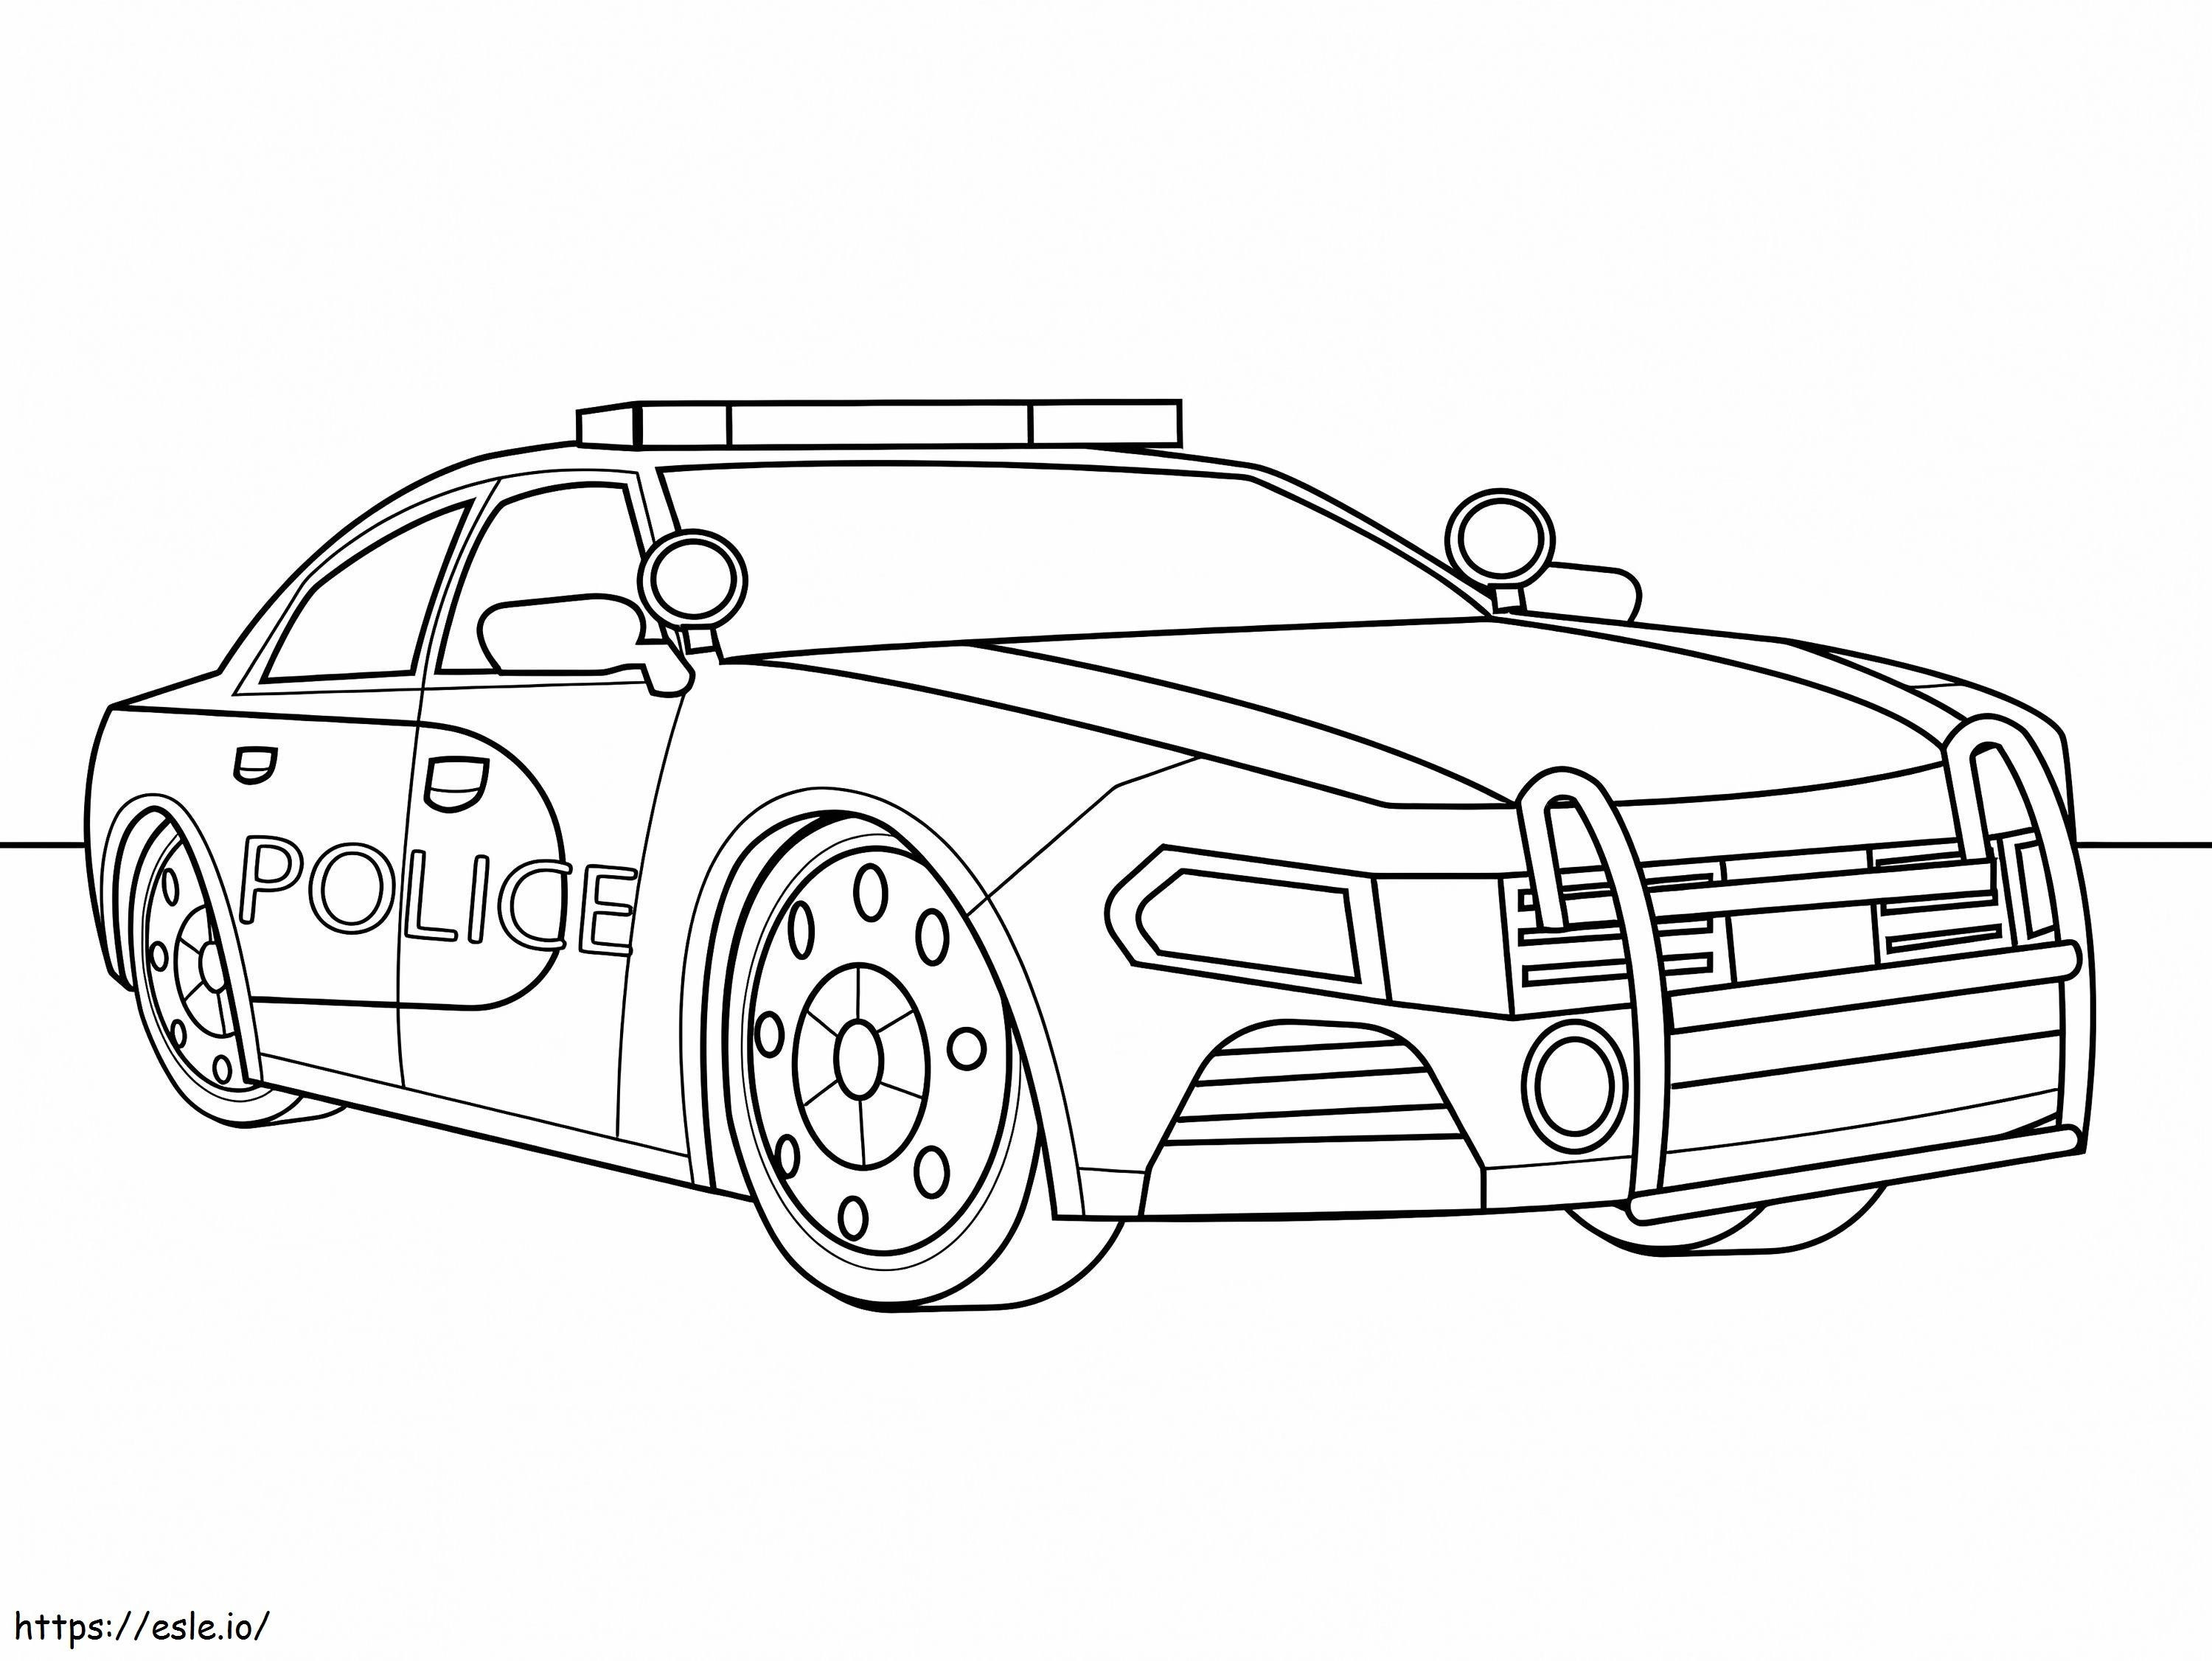 Sport Police Car coloring page